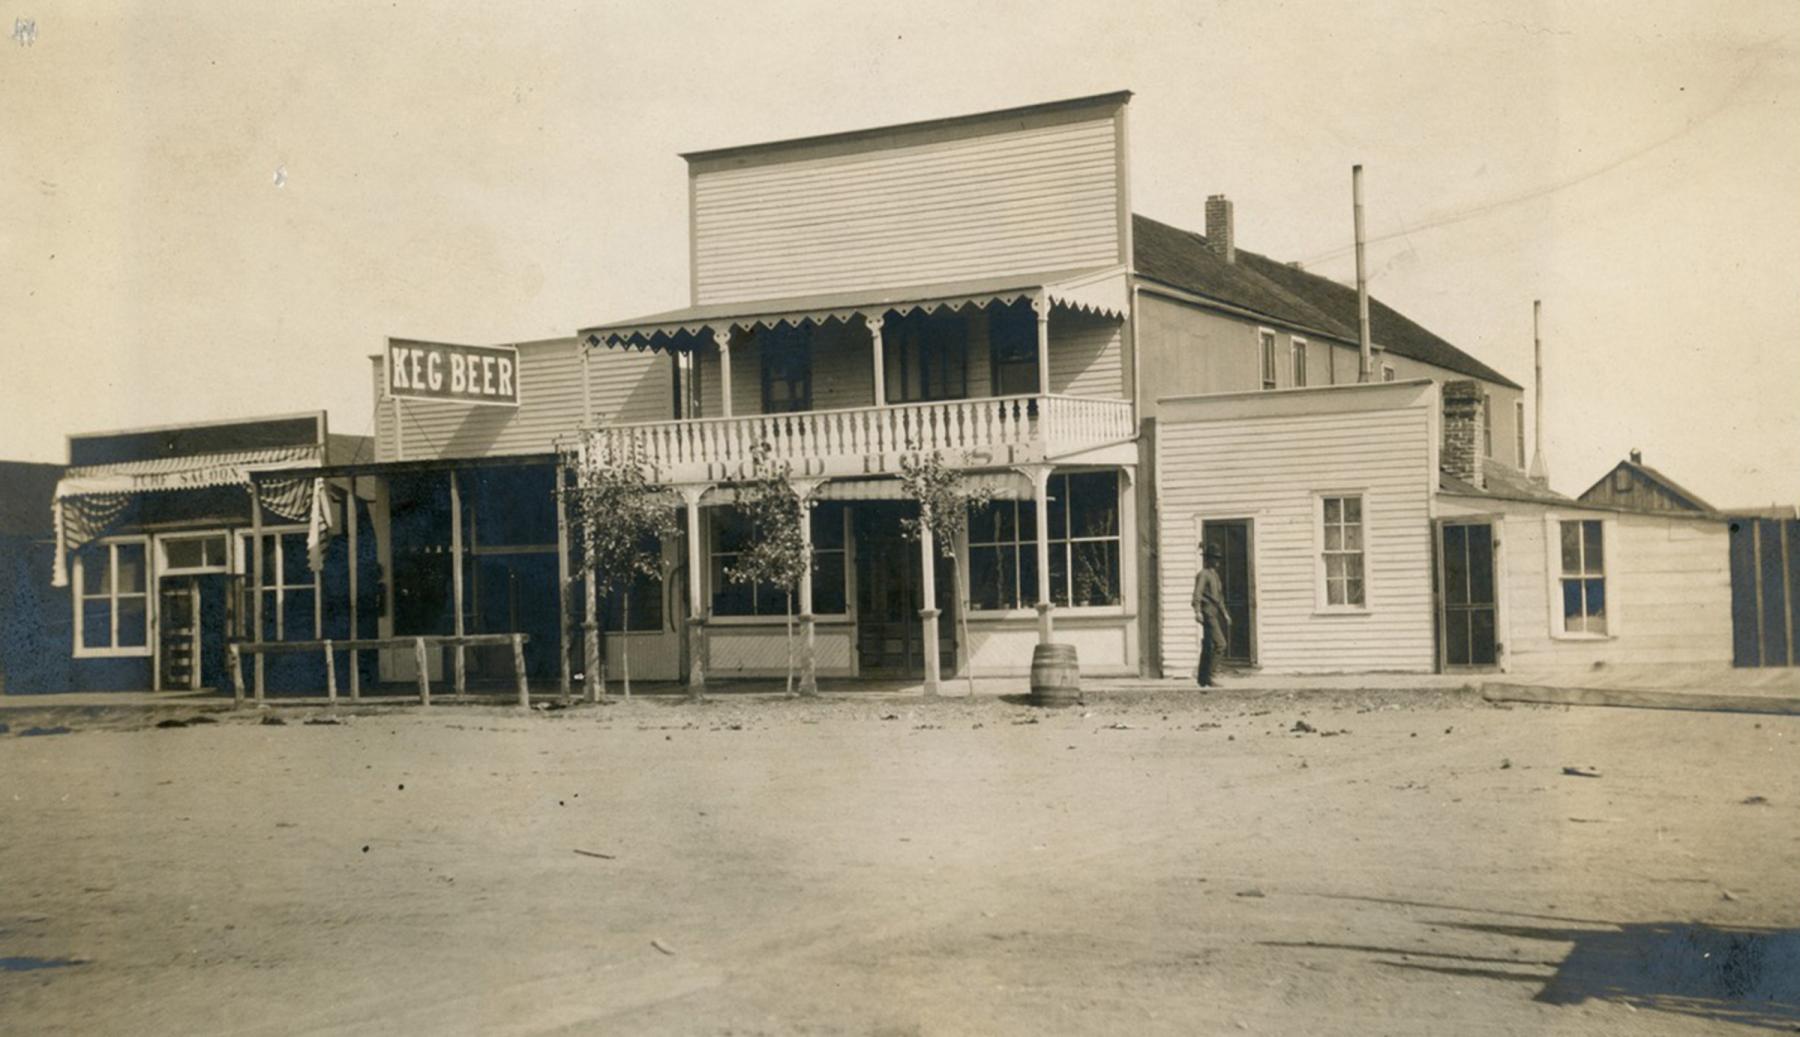 The Dodd House on Gillette Avenue in downtown Gillette, where Allie Means fled after being shot by Noah Richardson. Next to it is the Turf Saloon. Photo from about 1902-1905. Rockpile Museum.